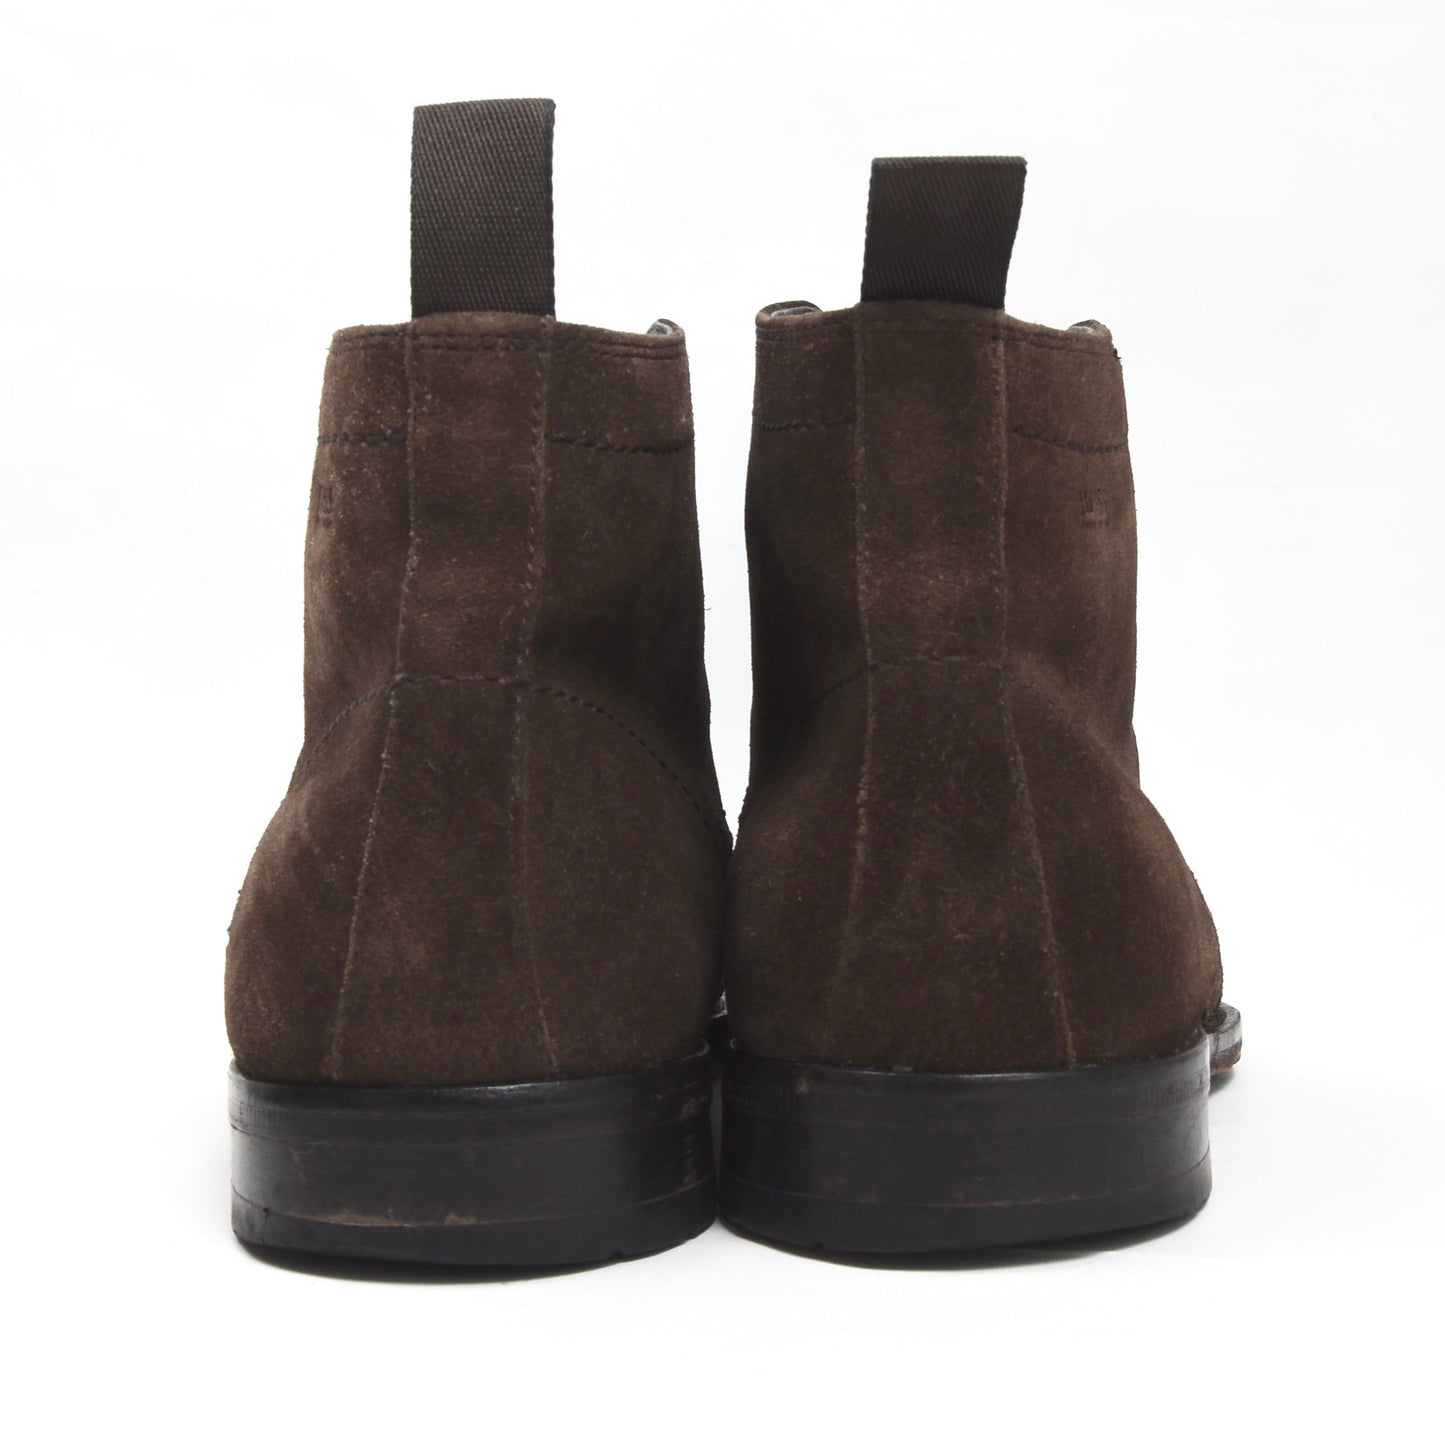 Hugo Boss Shearling Boots Size 7 - Brown